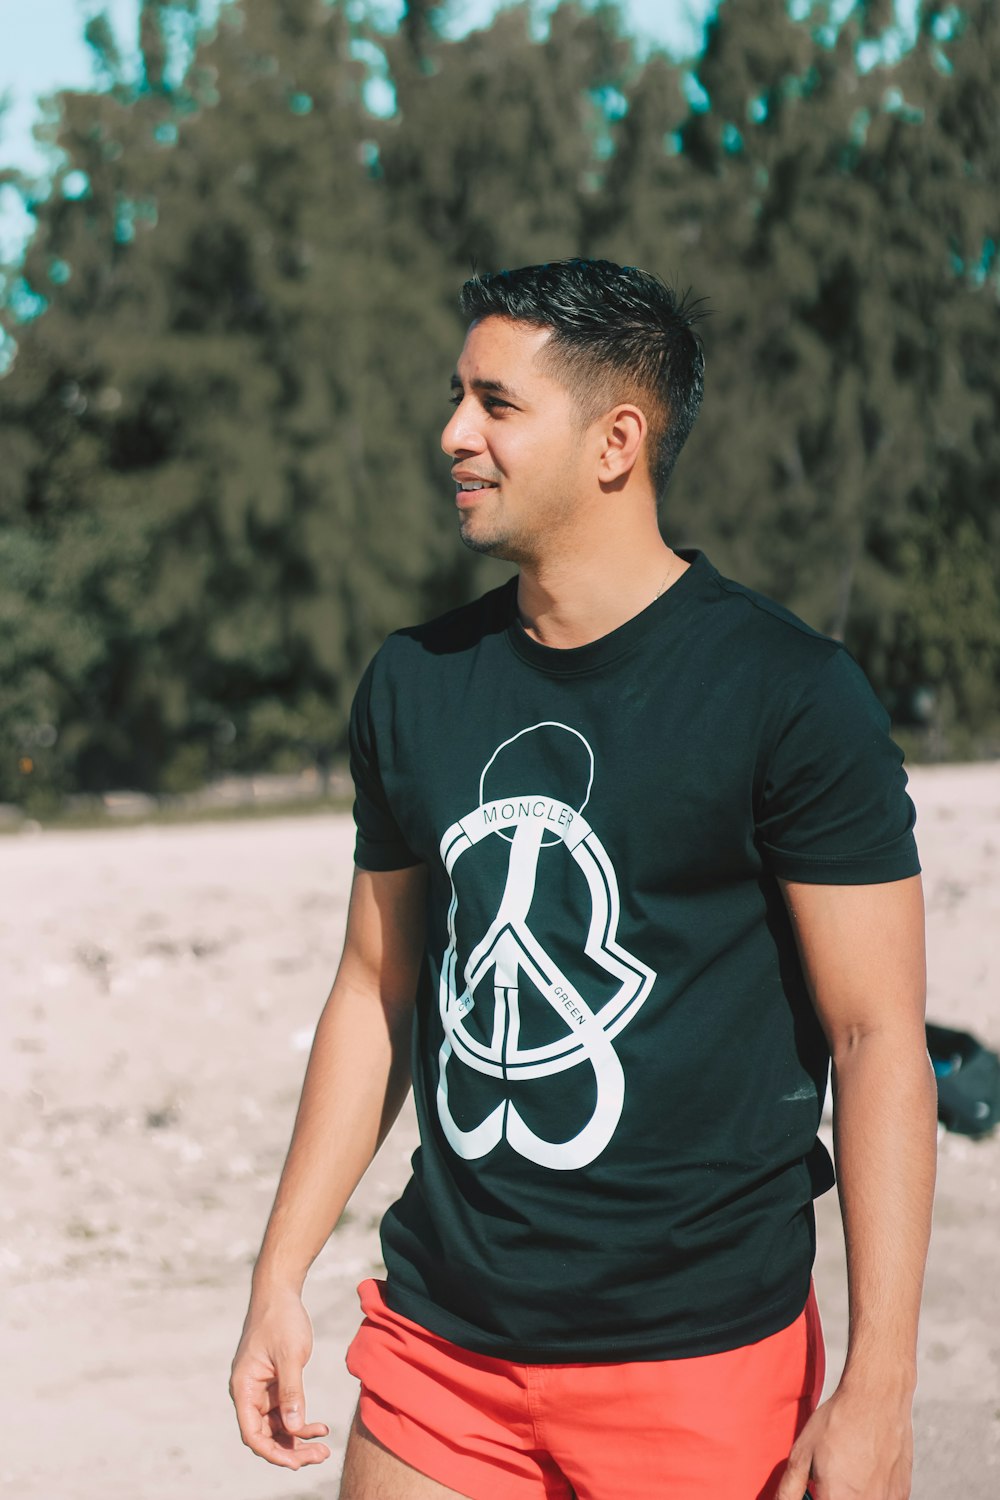 a man standing on a beach wearing a black shirt with a peace sign on it